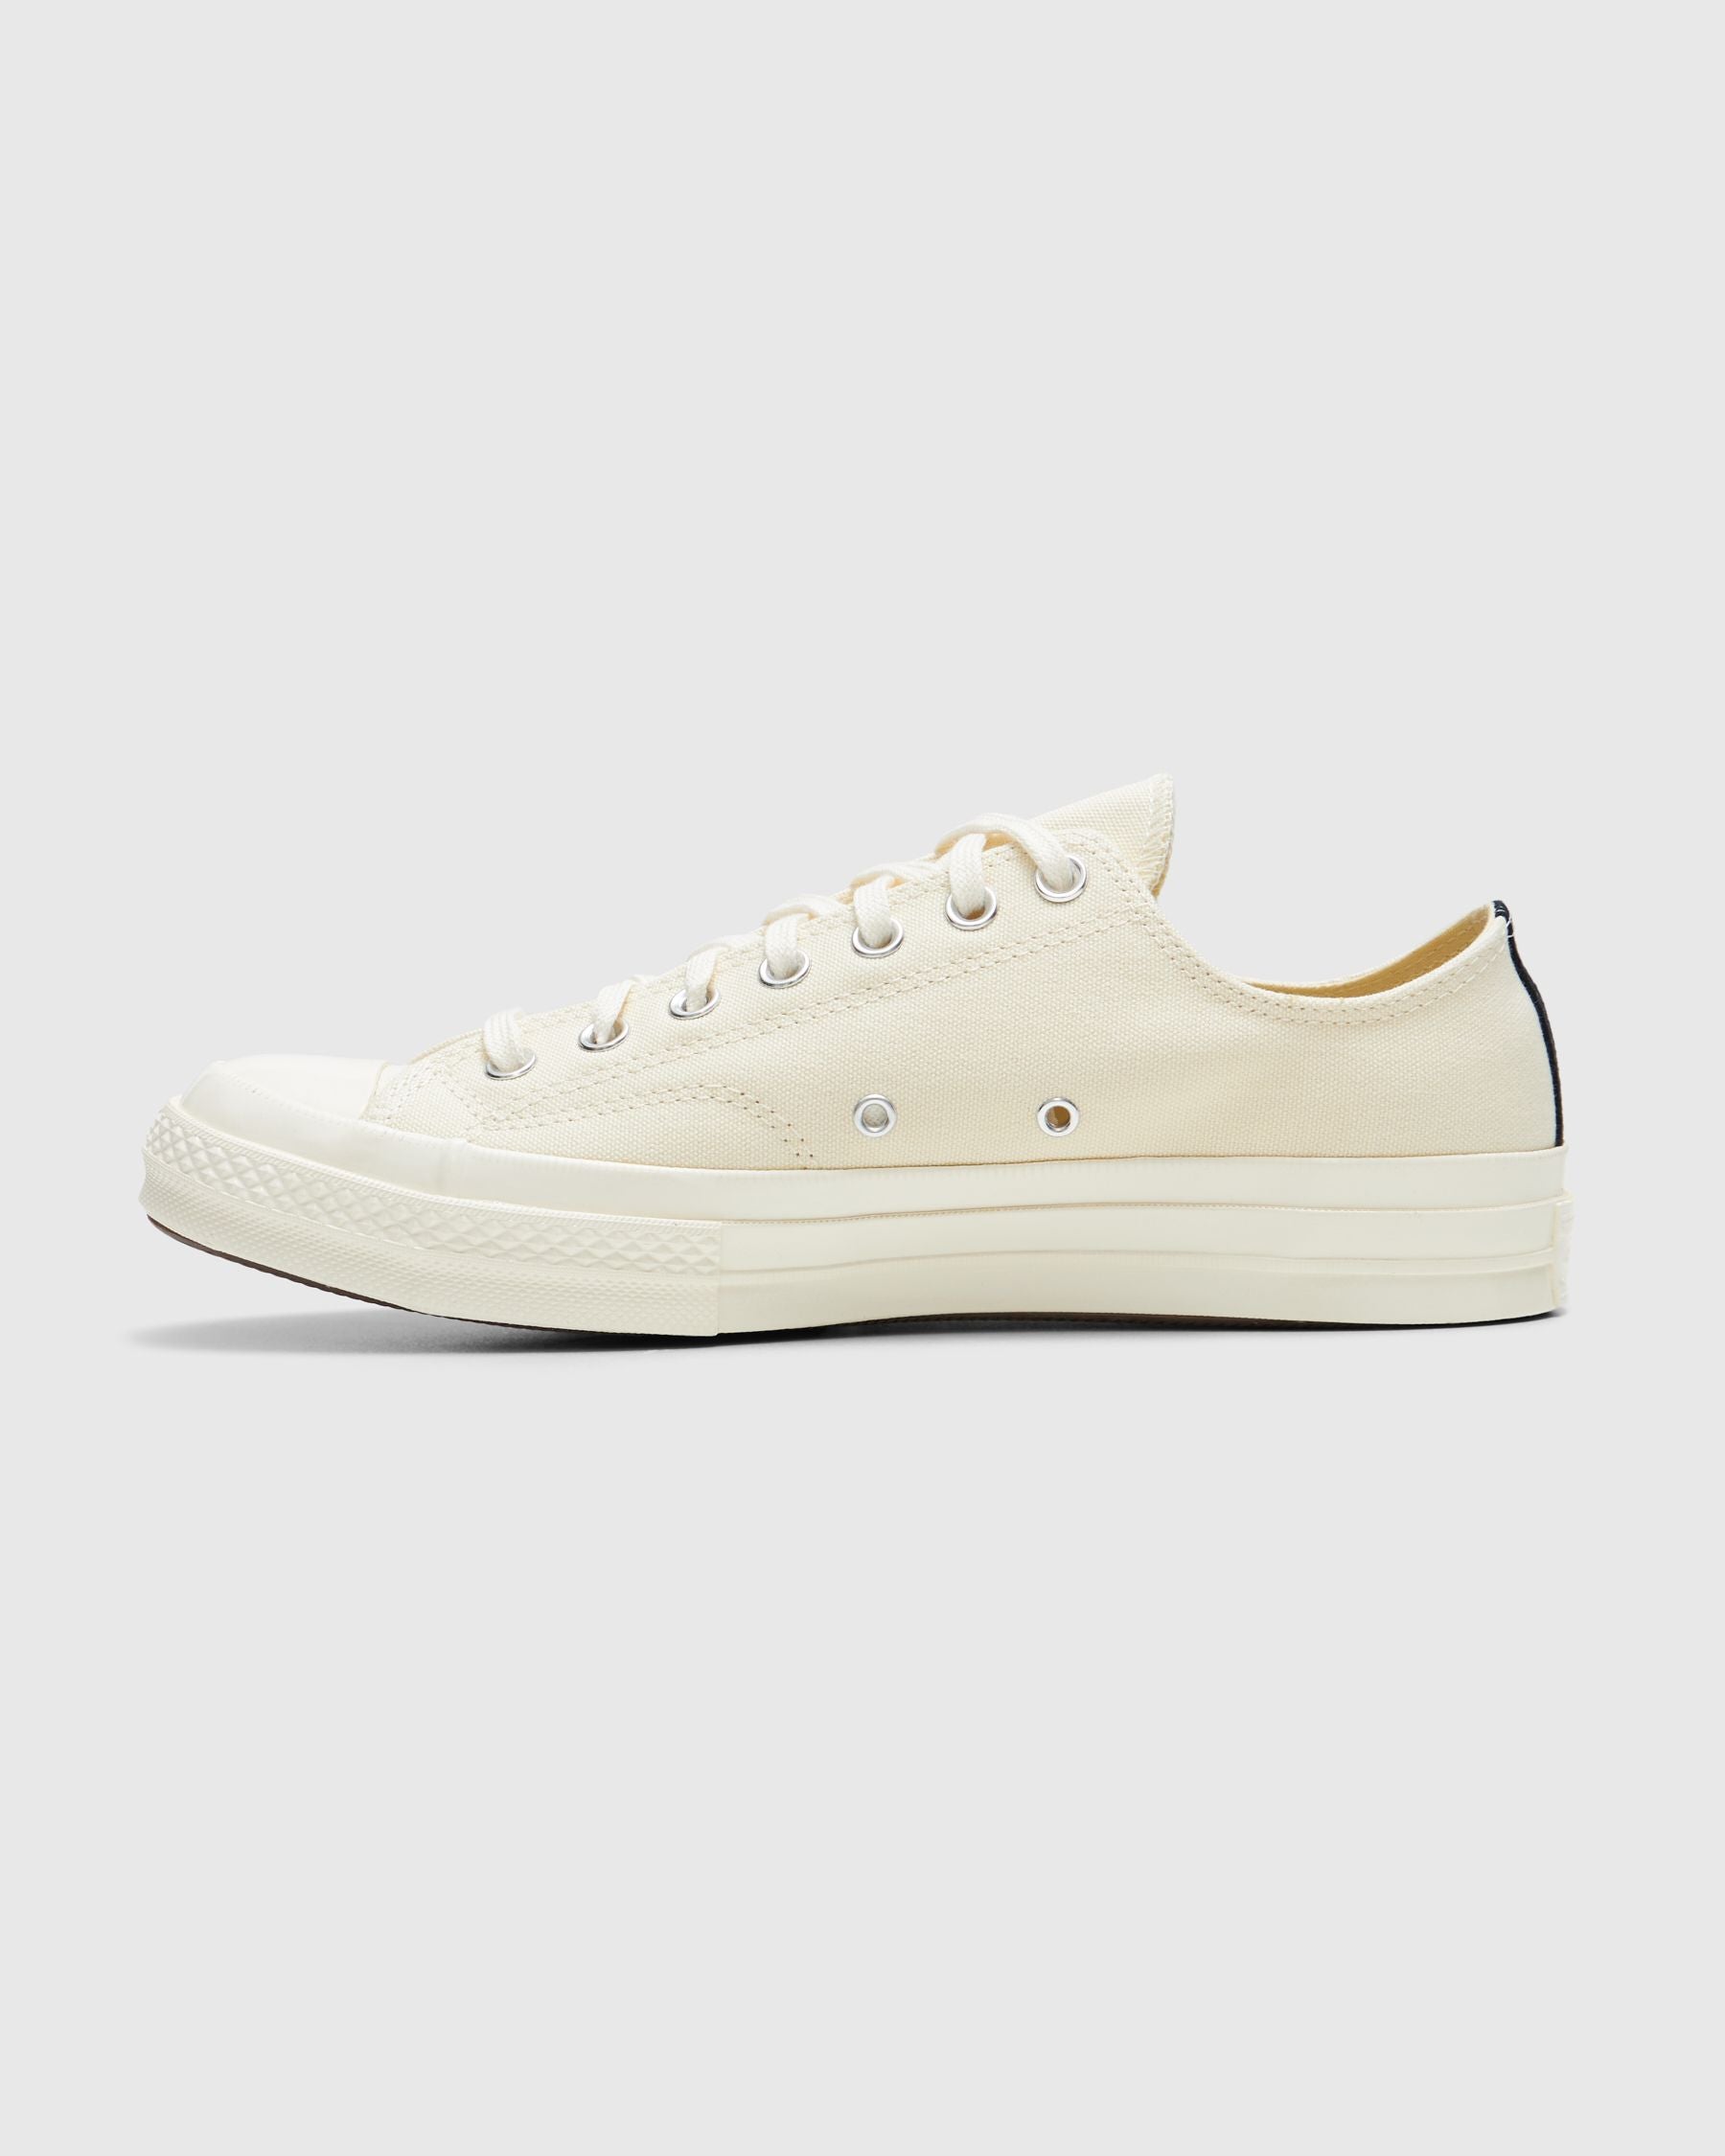 Red Heart Chuck Taylor All Star '70 Low in White